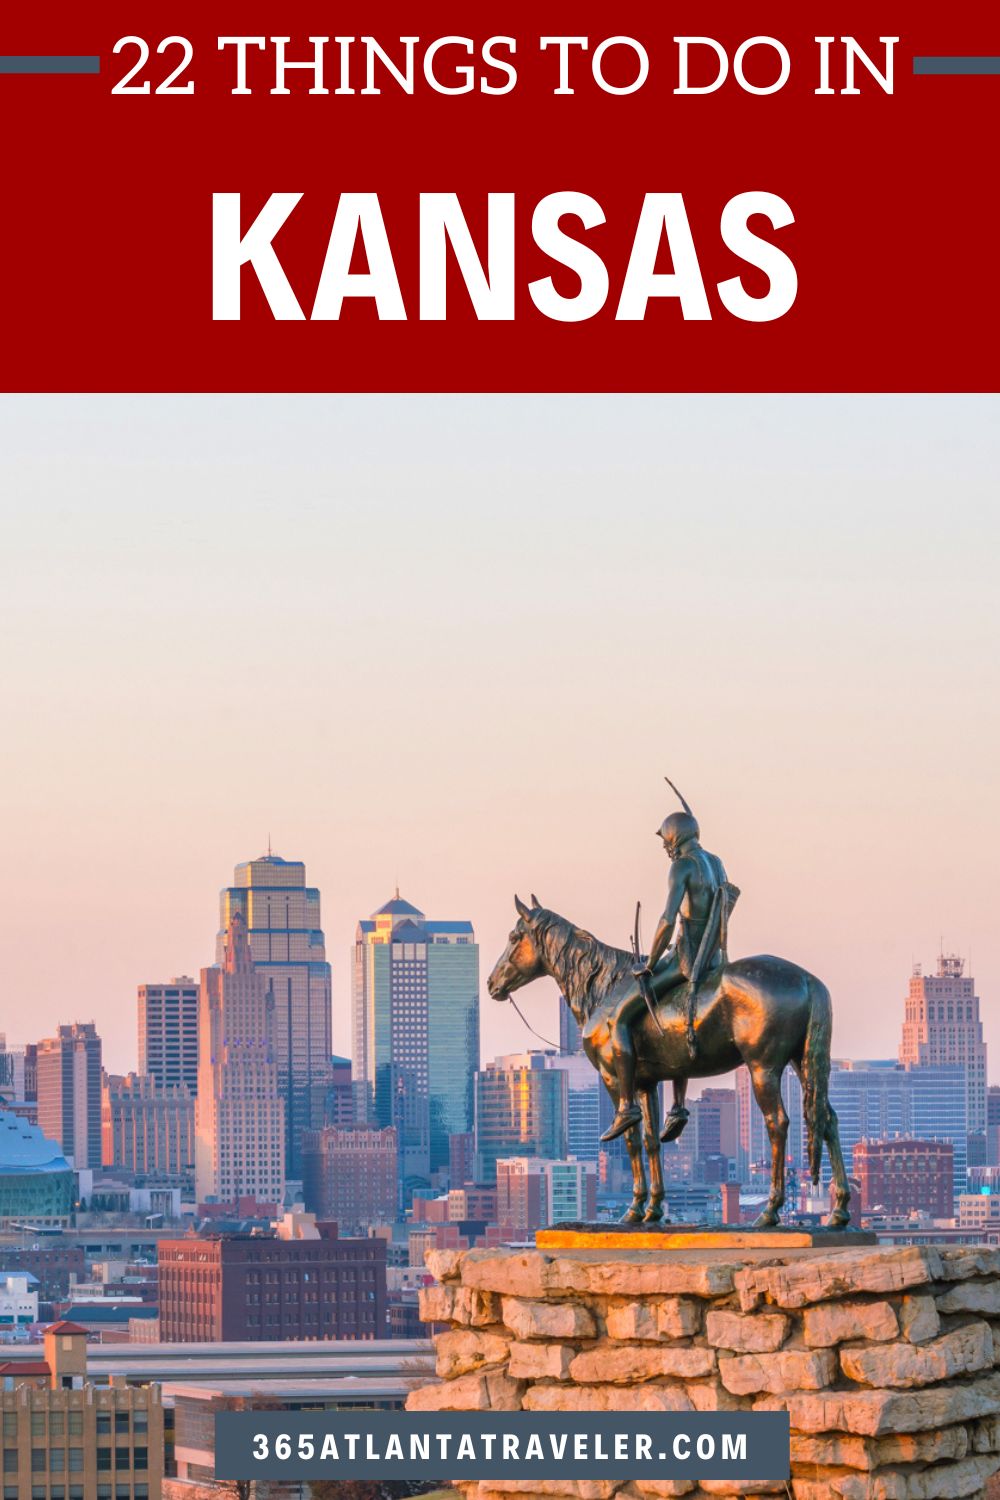 22 BEST THINGS TO DO IN KANSAS EVERYONE WILL LOVE